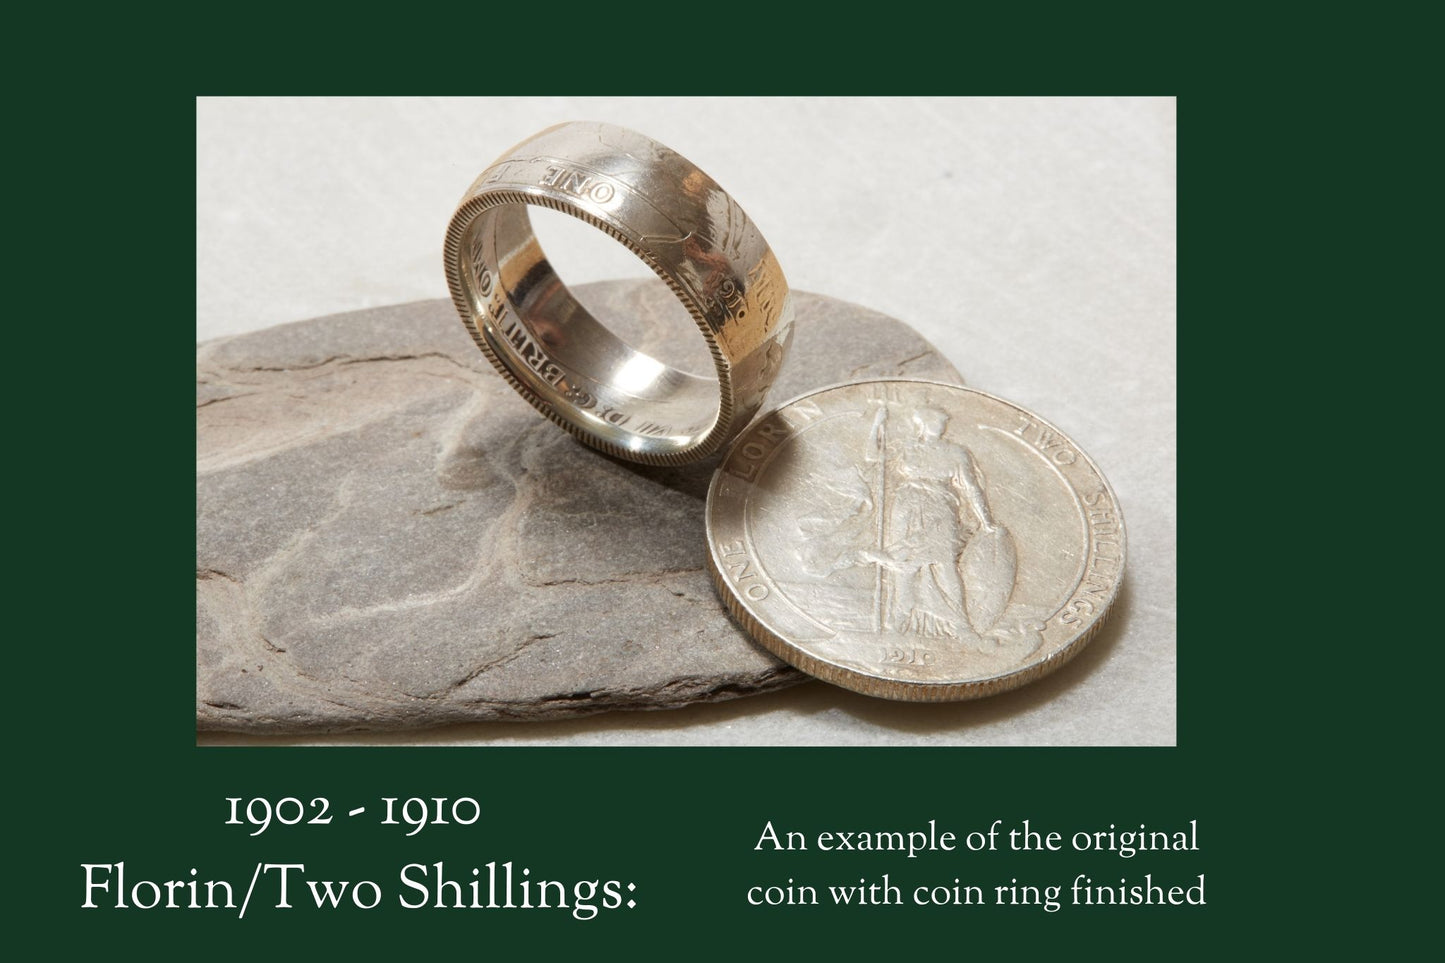 1910 florin coin ring on stone with coin